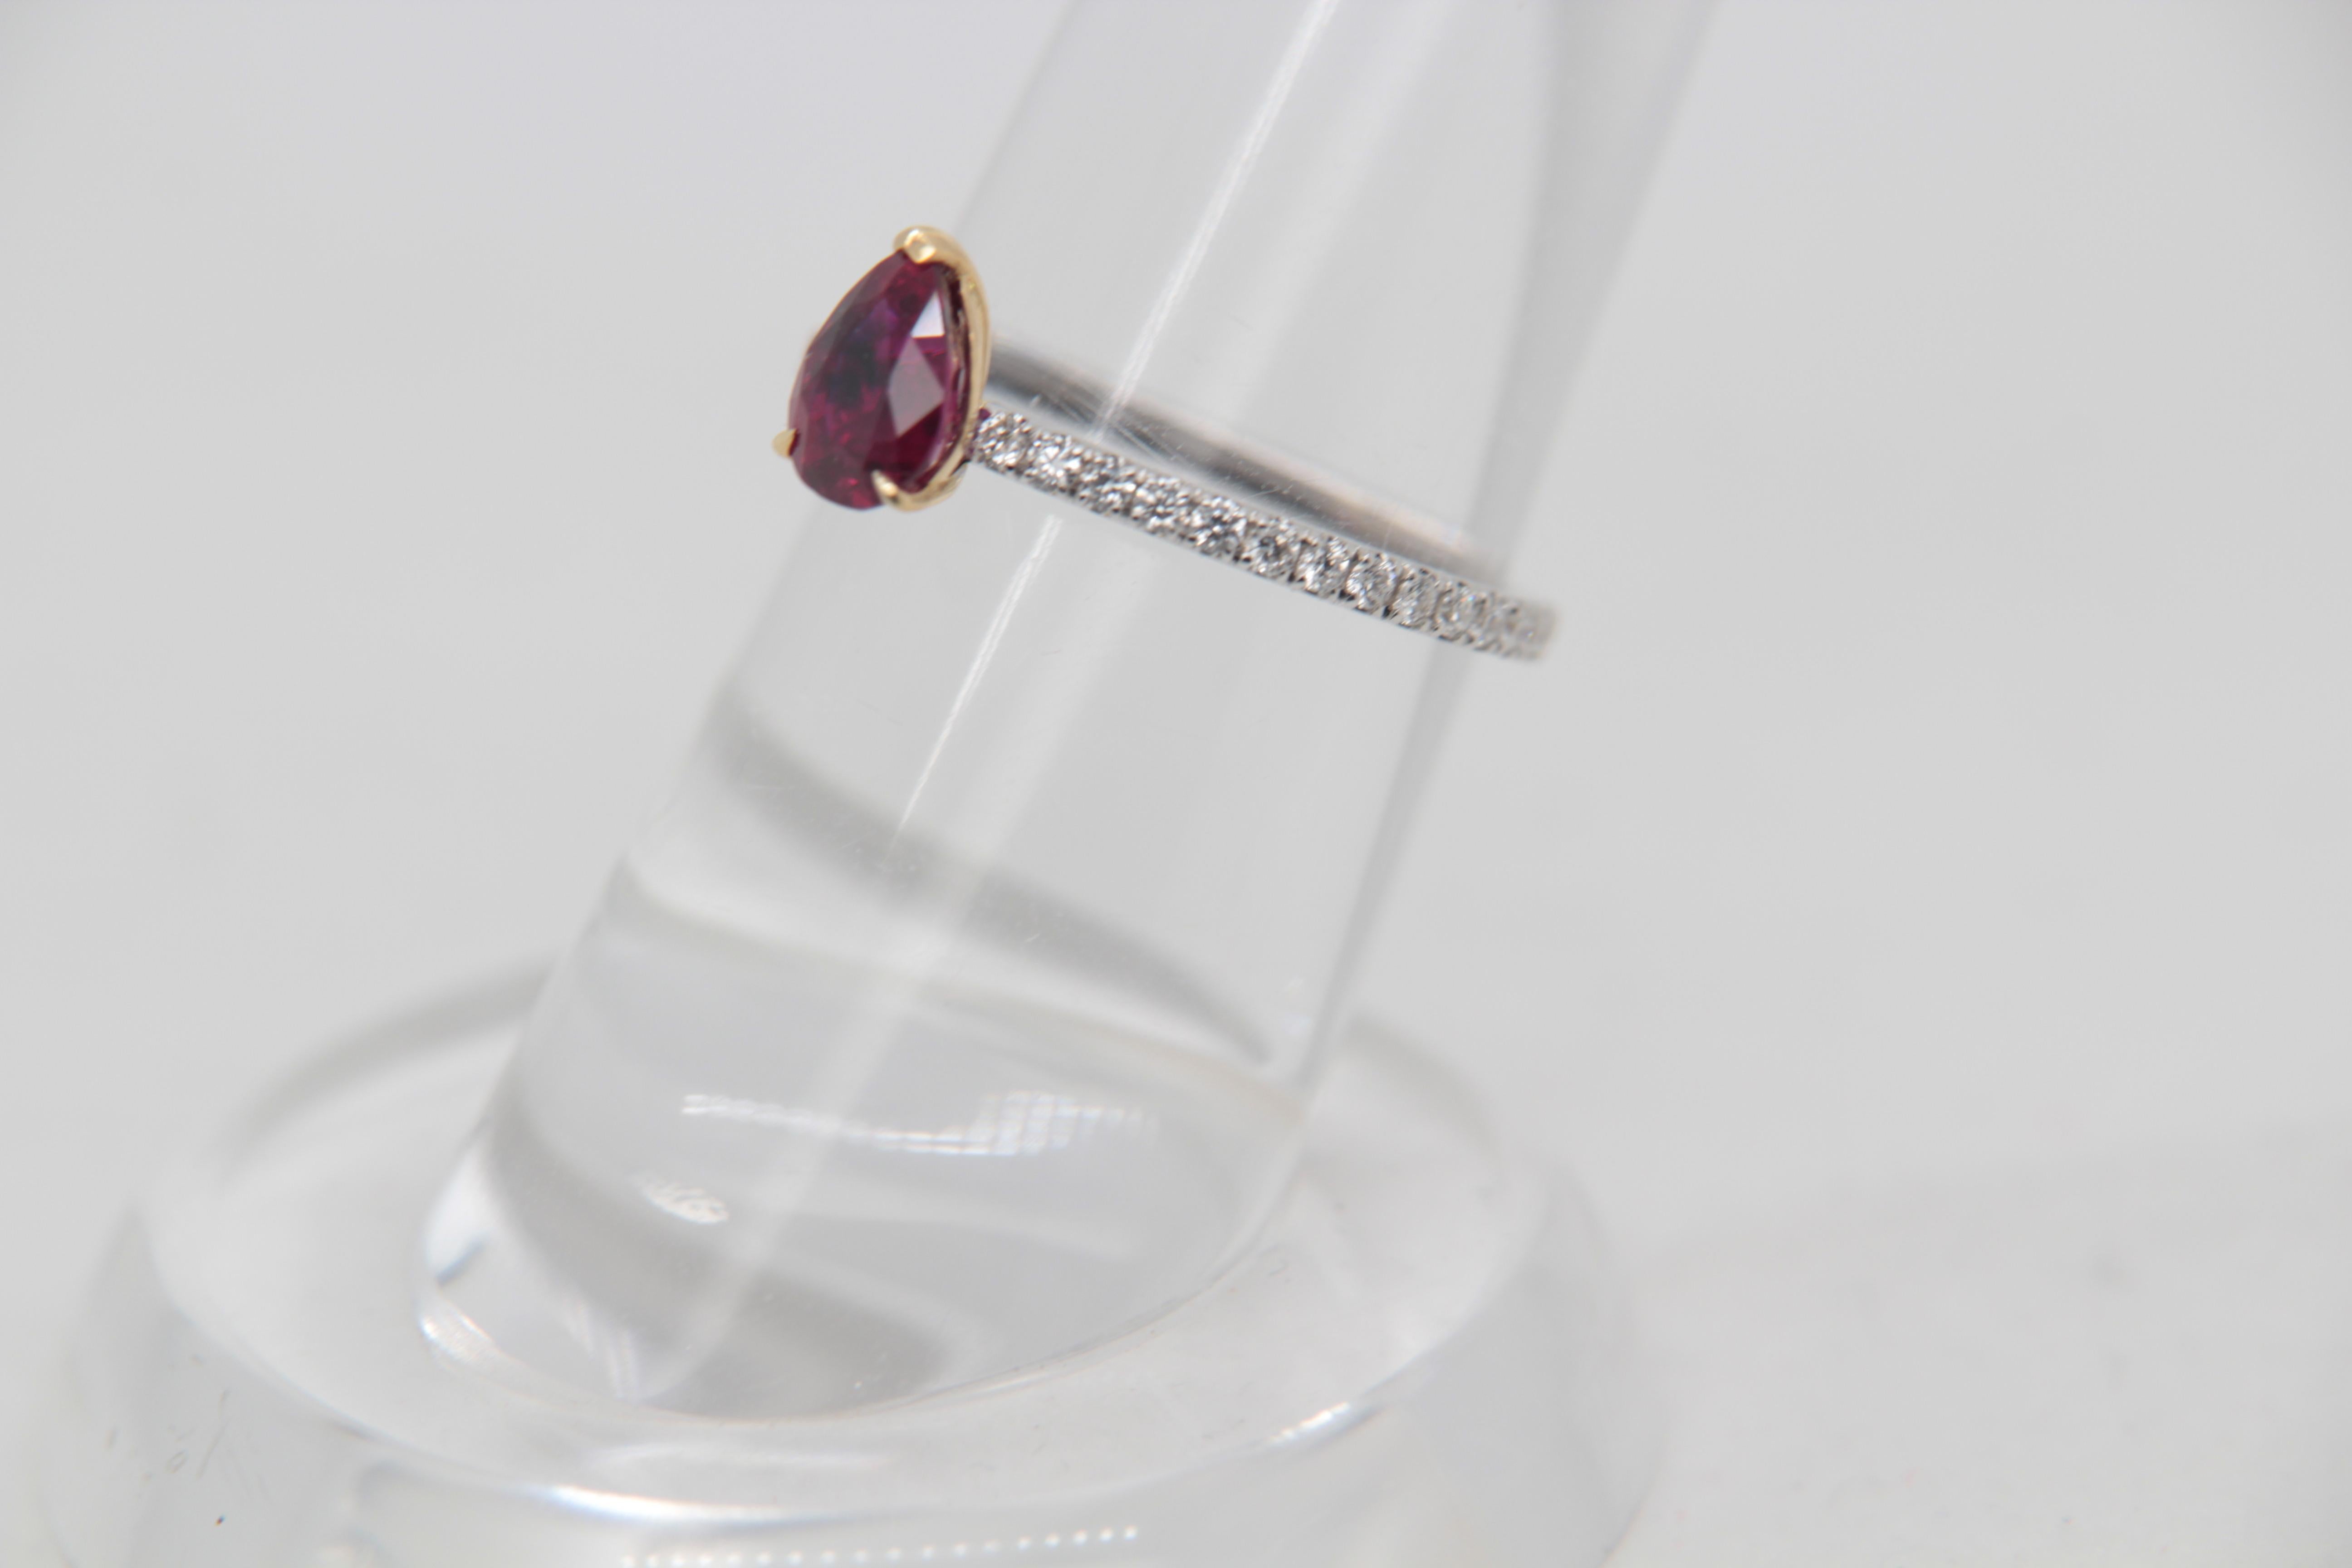 A brand new 0.96 carat Burmese ruby ring mounted with diamonds in 18 Karat gold. The ruby weighs 0.96 carat and is certified by Gem Research Swisslab (GRS) as natural, no heat, and 'Vivid Red Pigeon's Blood'. The total diamond weight is 0.30 carat